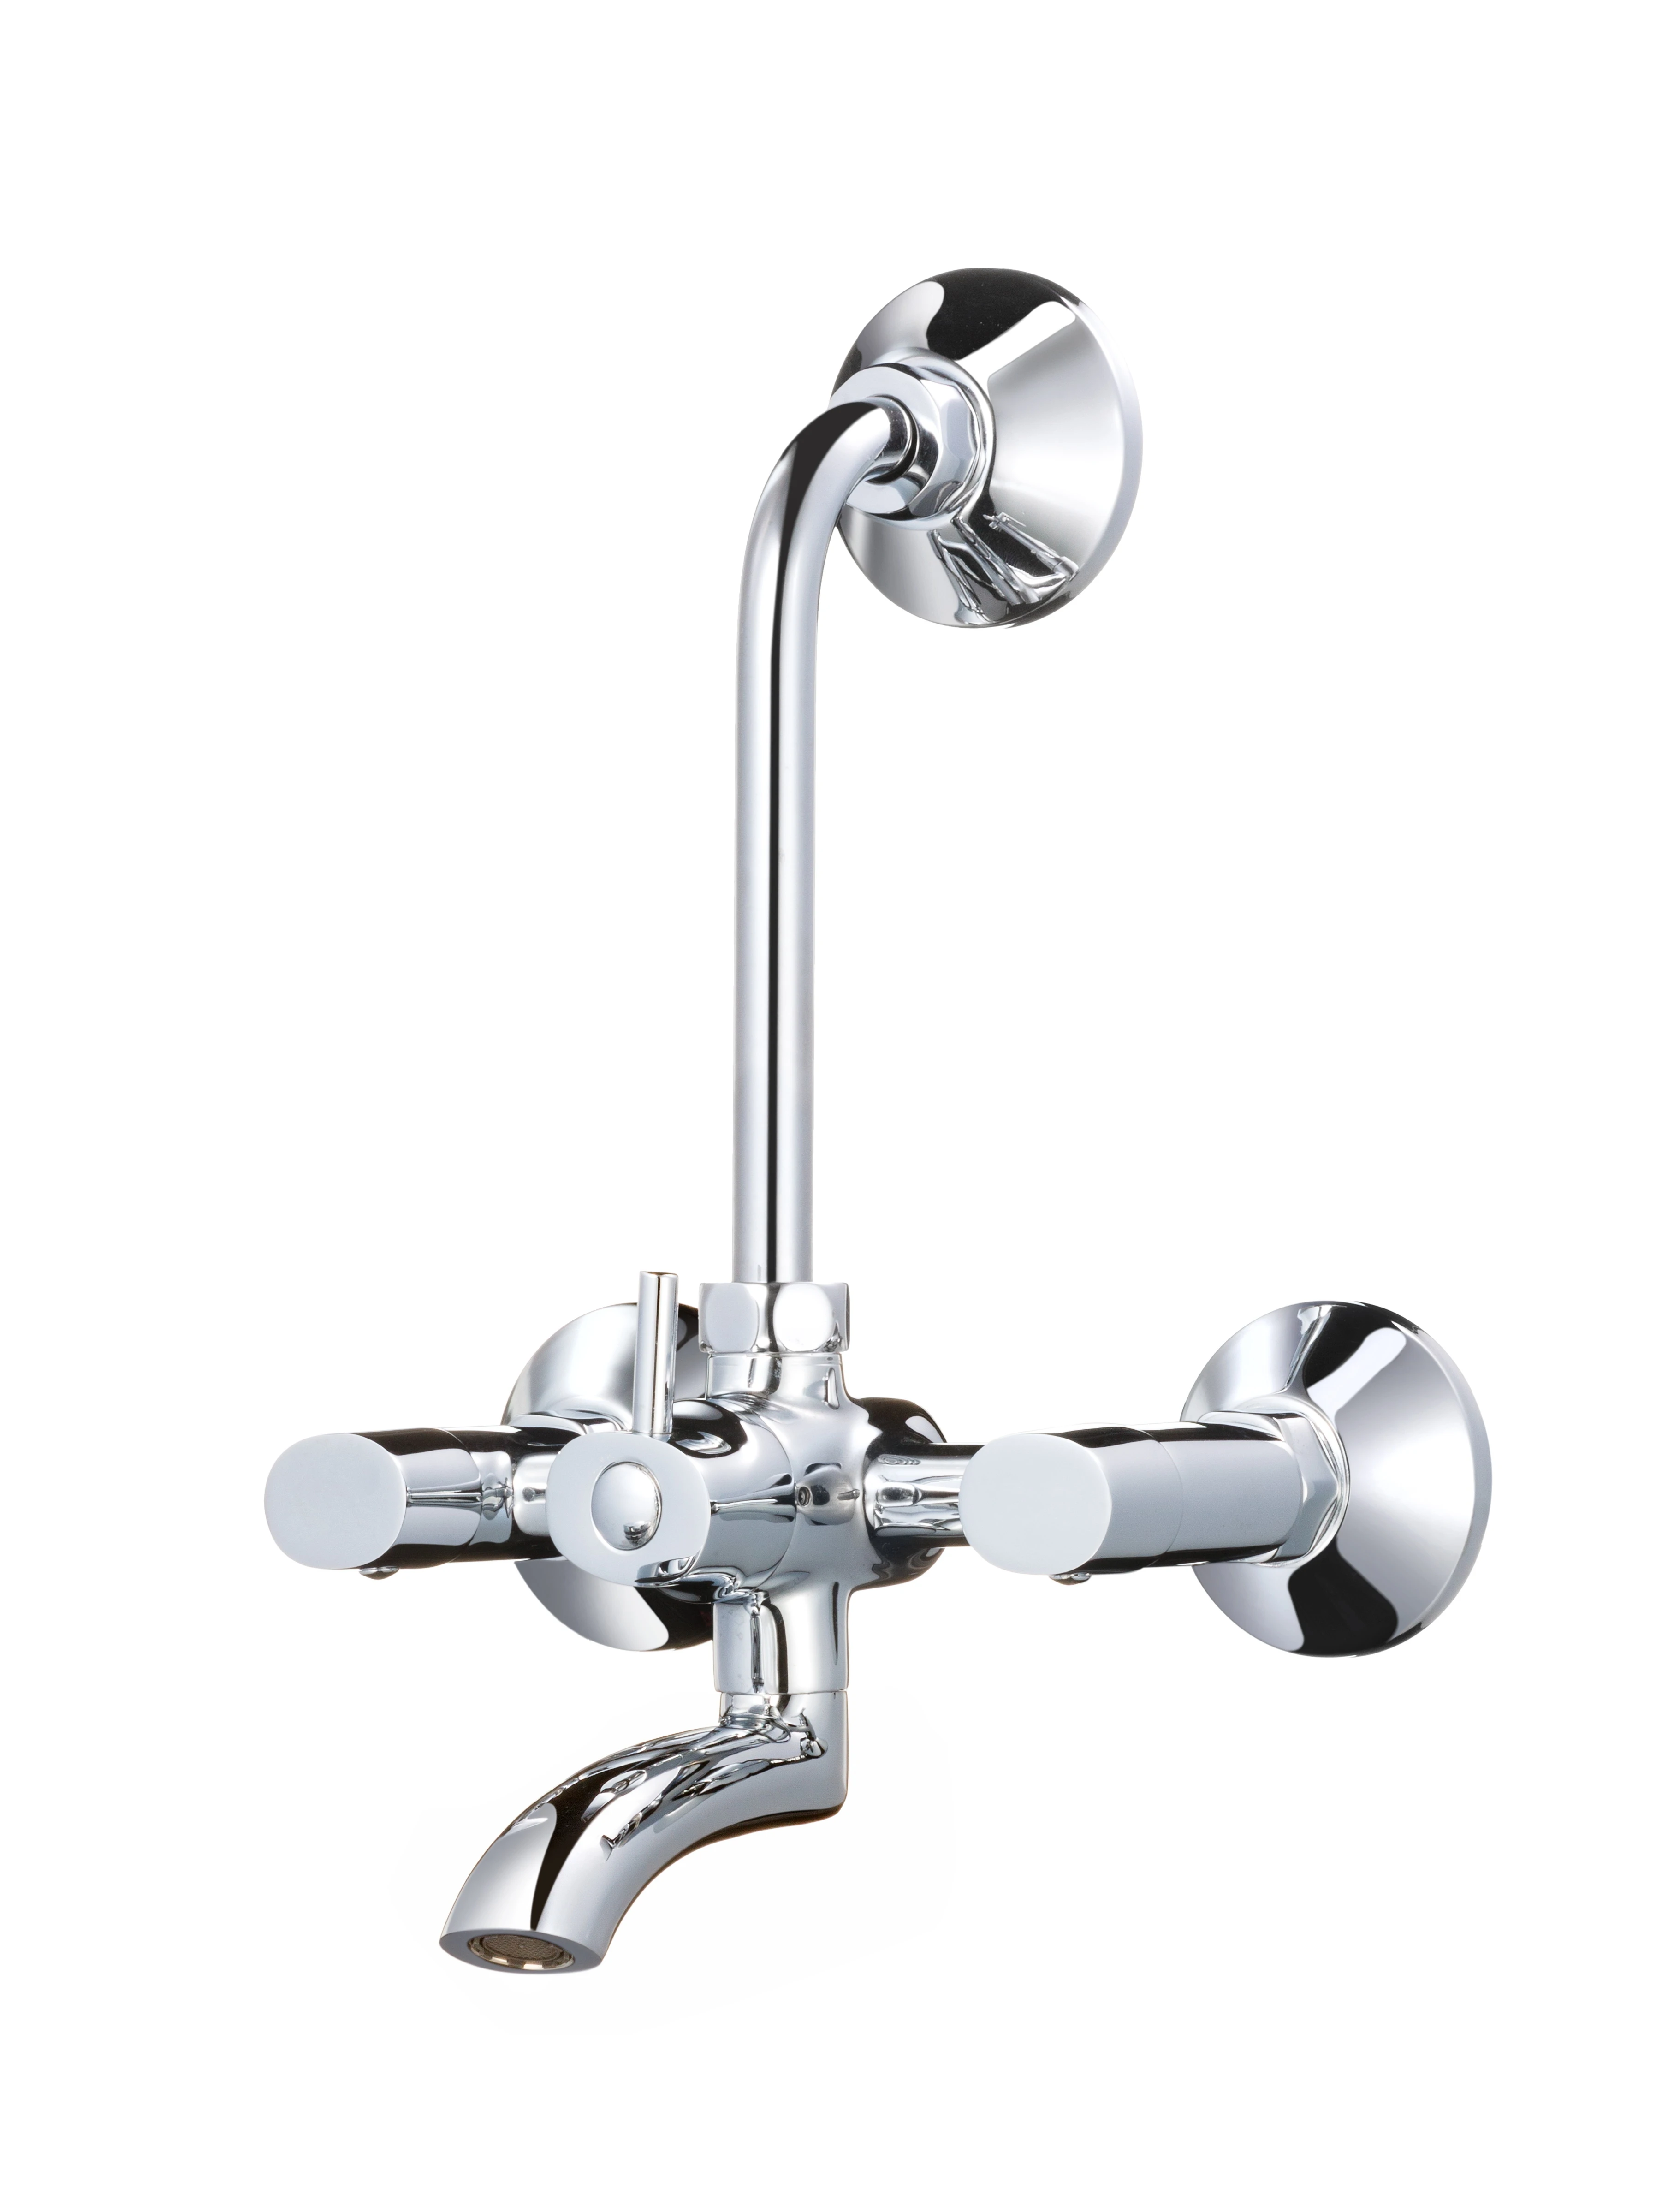 Leaves Wall mounted Solid Brass Bathroom Shower Hot and Cold Water Shower Mixer And Bath Mixer